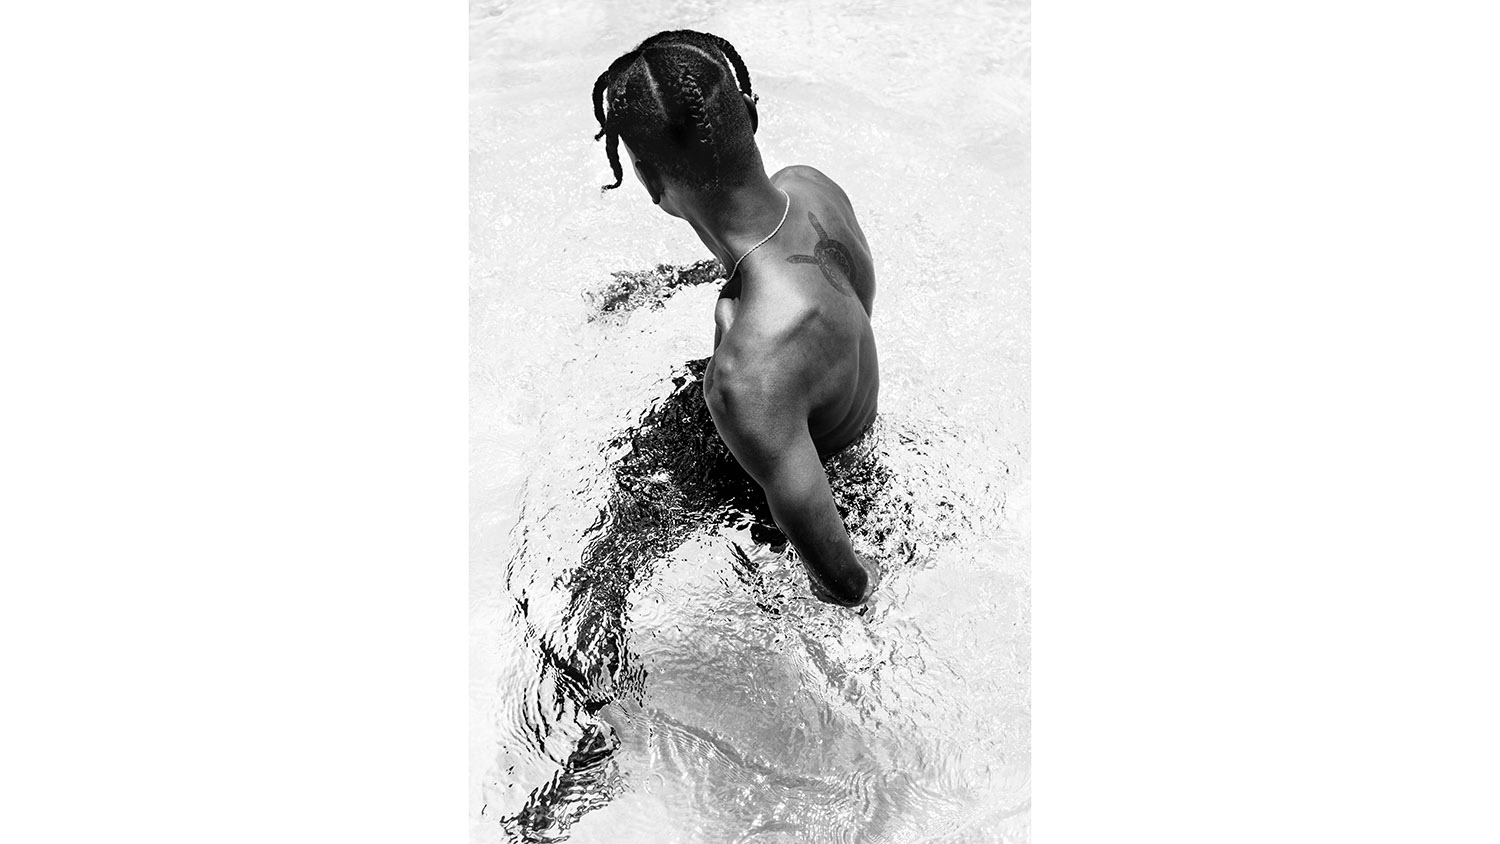 A photo of a boy in water